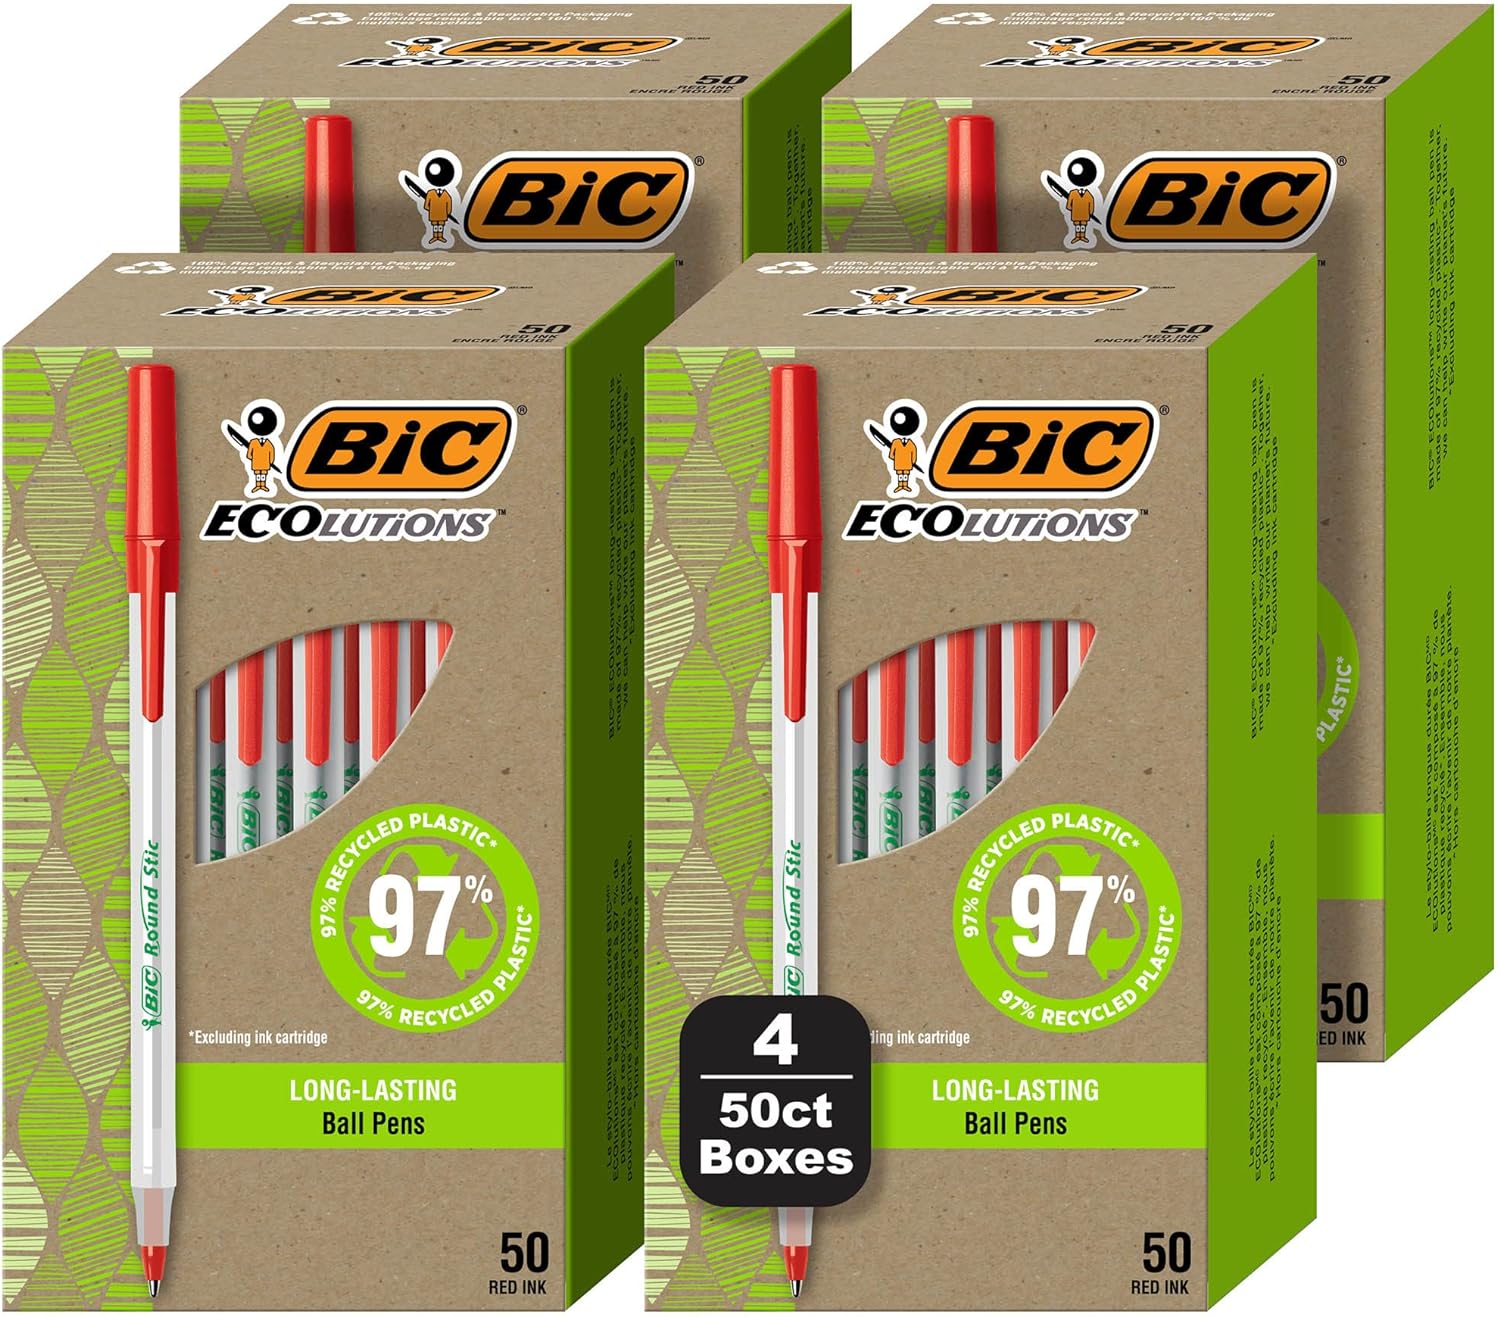 BIC Ecolutions Round Stic Ballpoint Pens, Medium Point (1.0mm), 50 Count (Pack of 4), Red Ink Pens Made from 97% Recycled Plastic